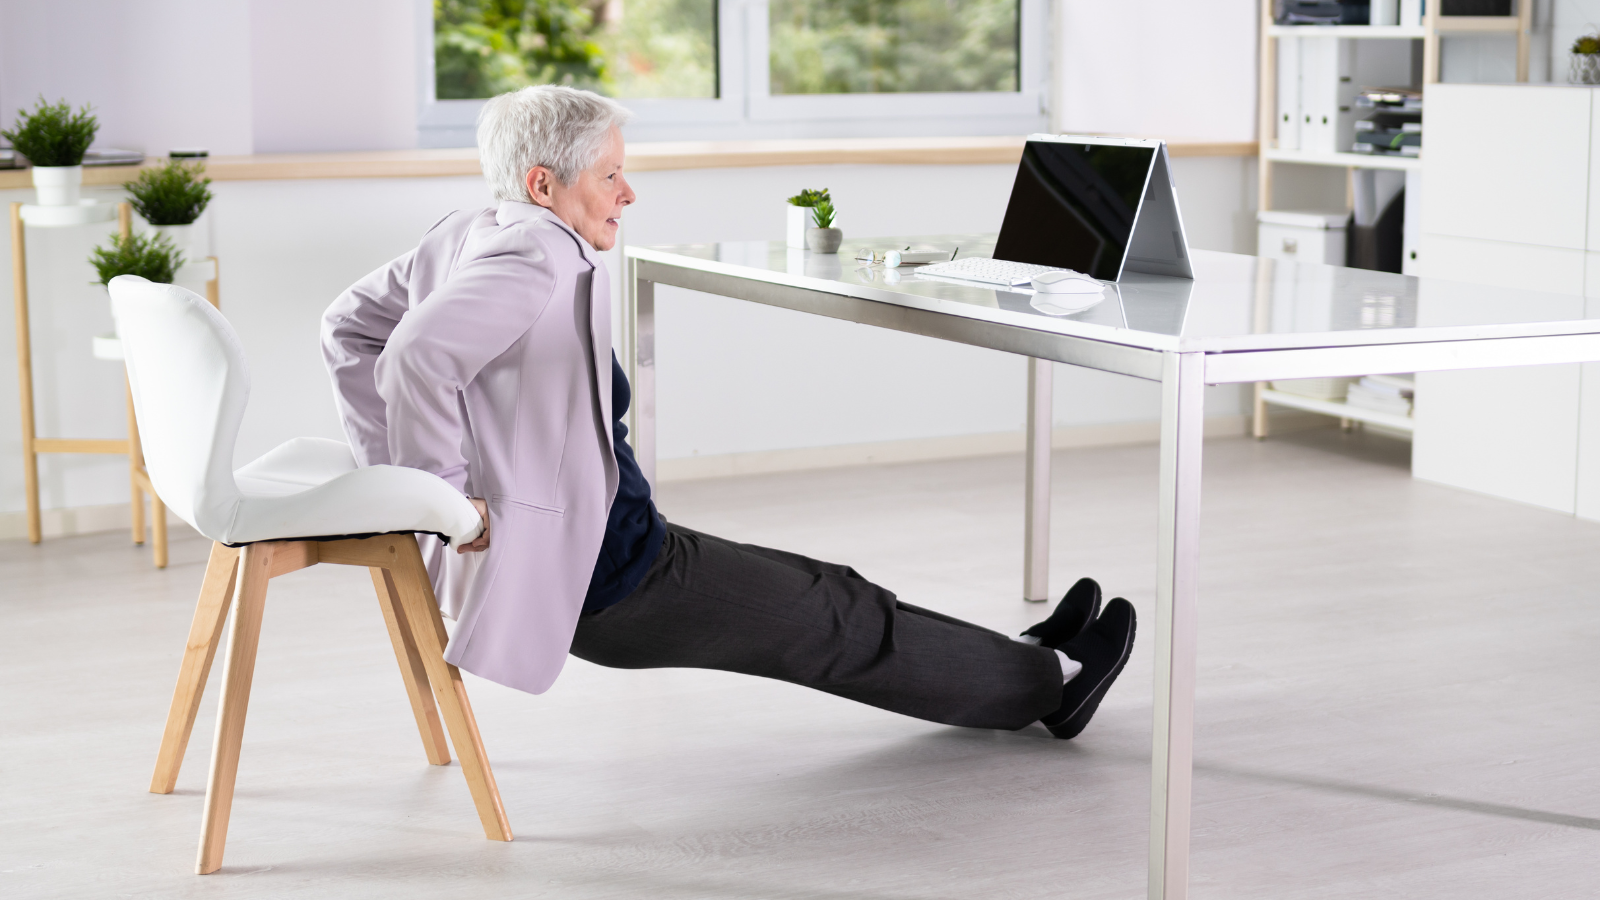 Chair Yoga at the office counteracts too much sitting while also increasing strength and flexibility that can help reduce pain.